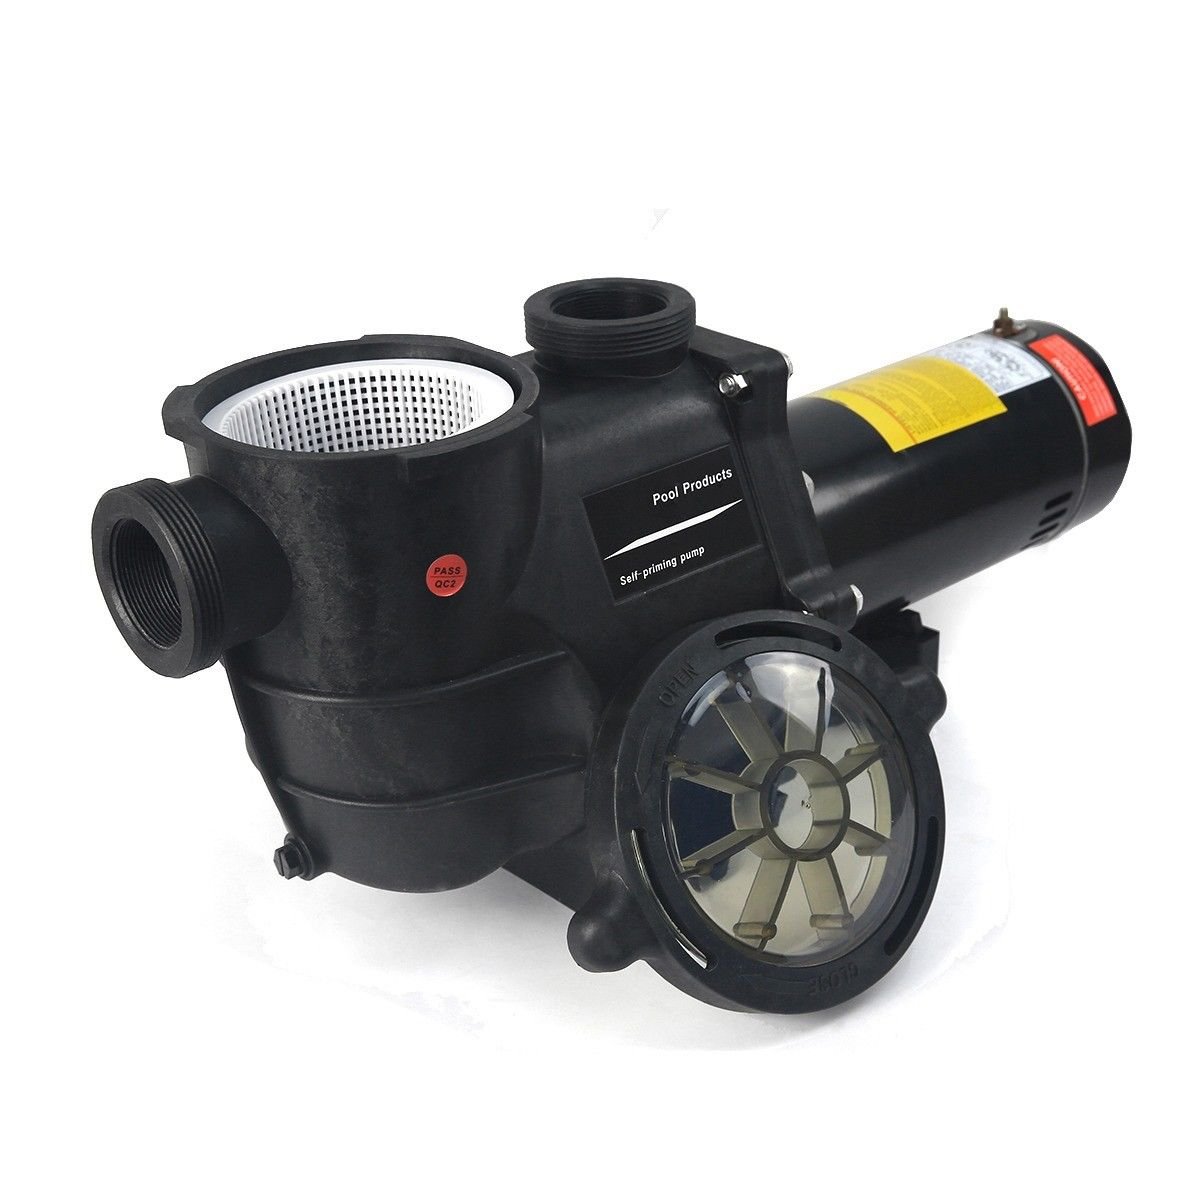 XtremepowerUS In-ground Pool Pumps